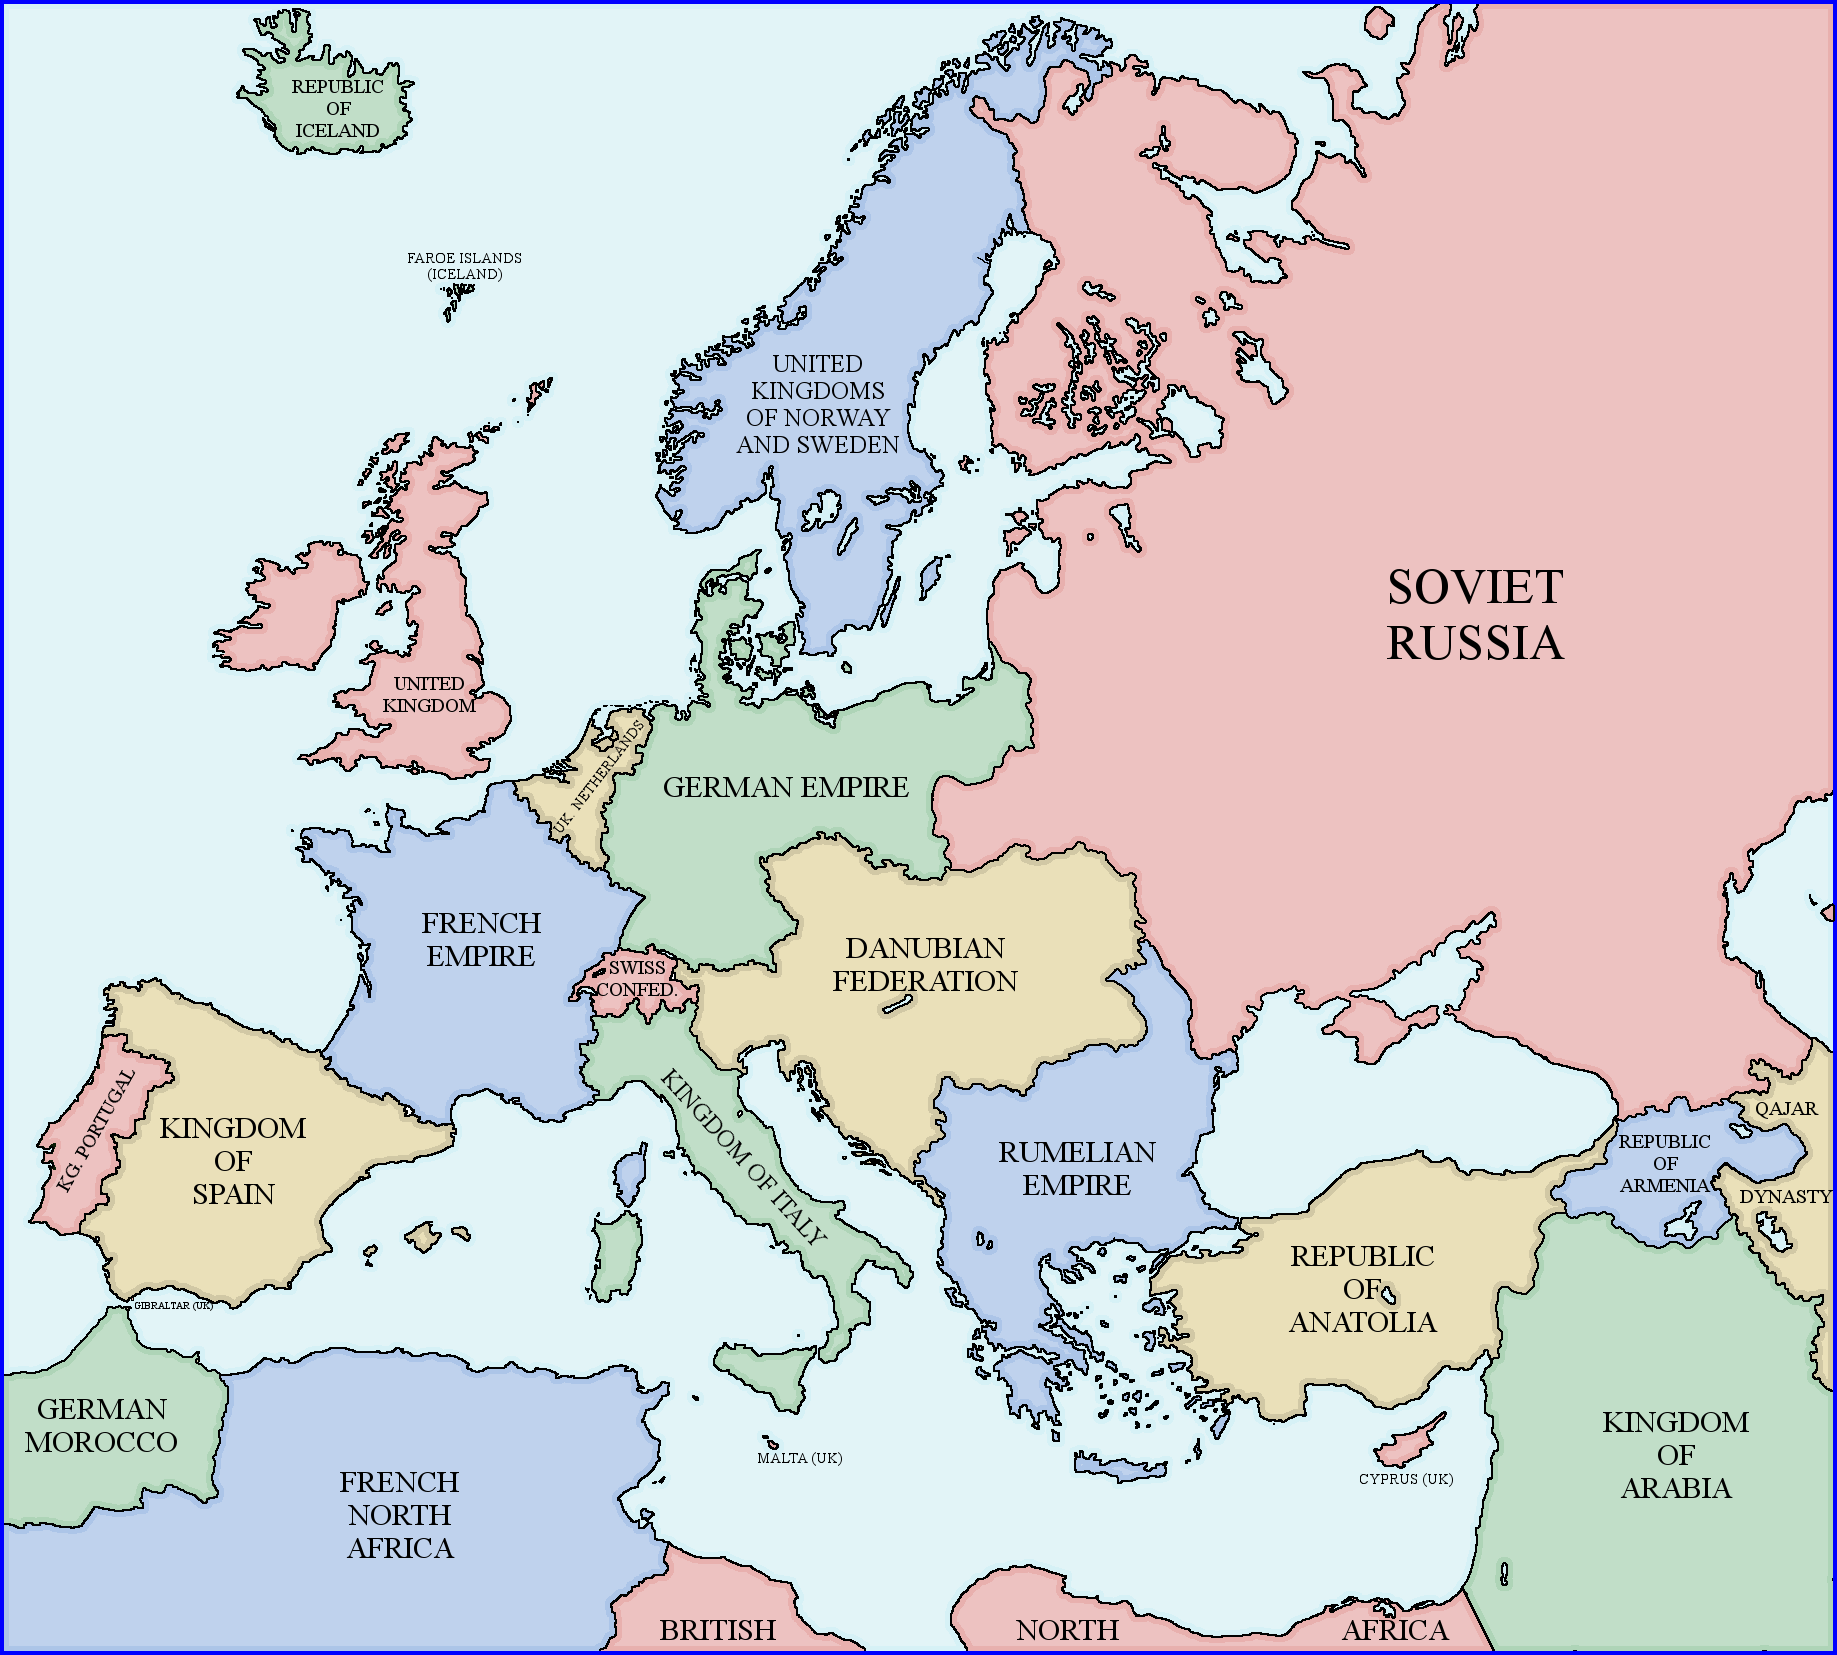 Map of Europe 1938 (Rumelia Universe) by xpnck